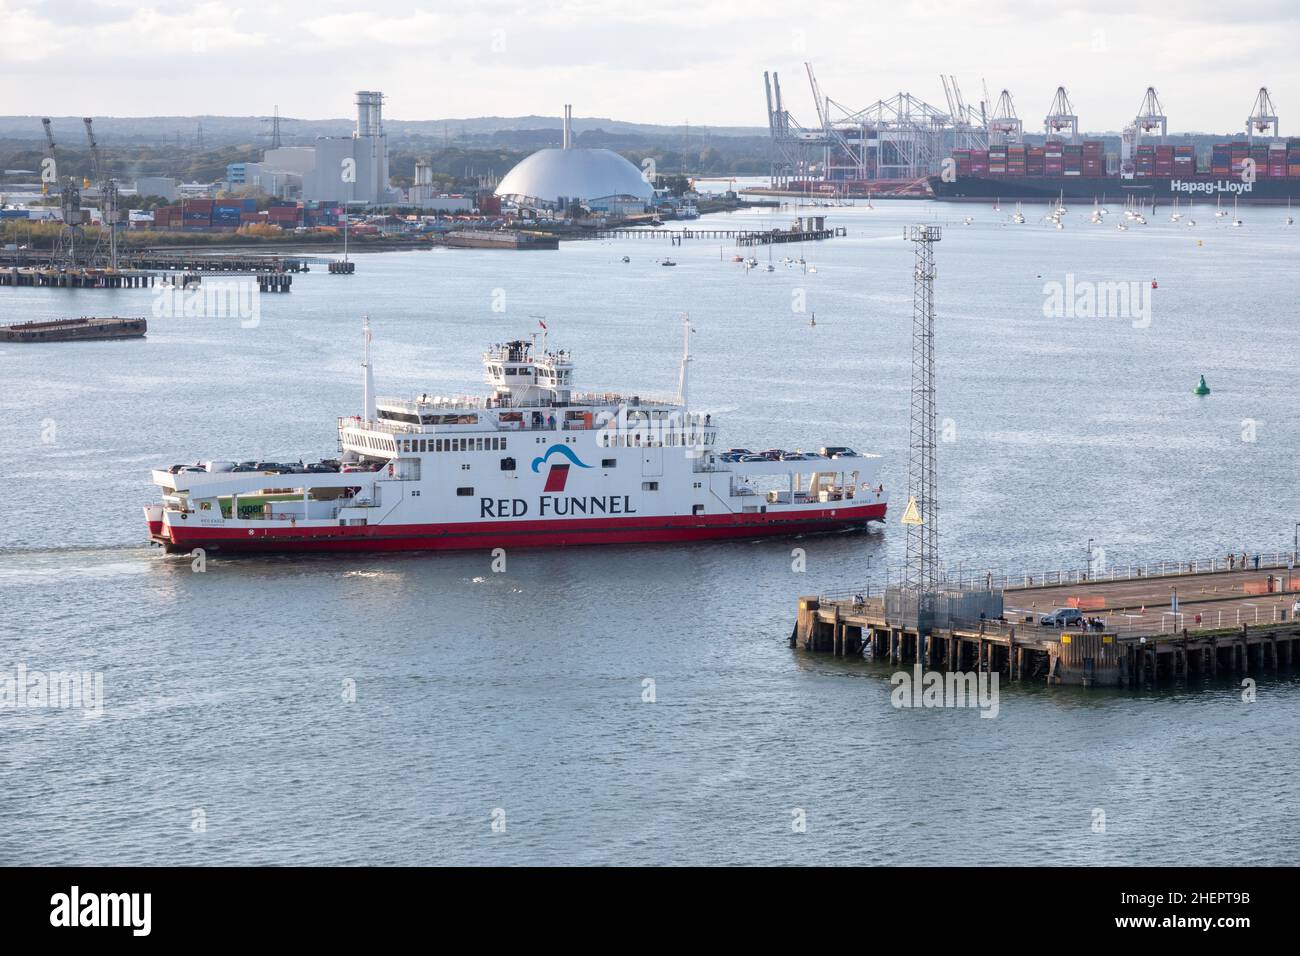 Red Funnel car ferry, red eagle, in the port of Southampton, UK Stock Photo